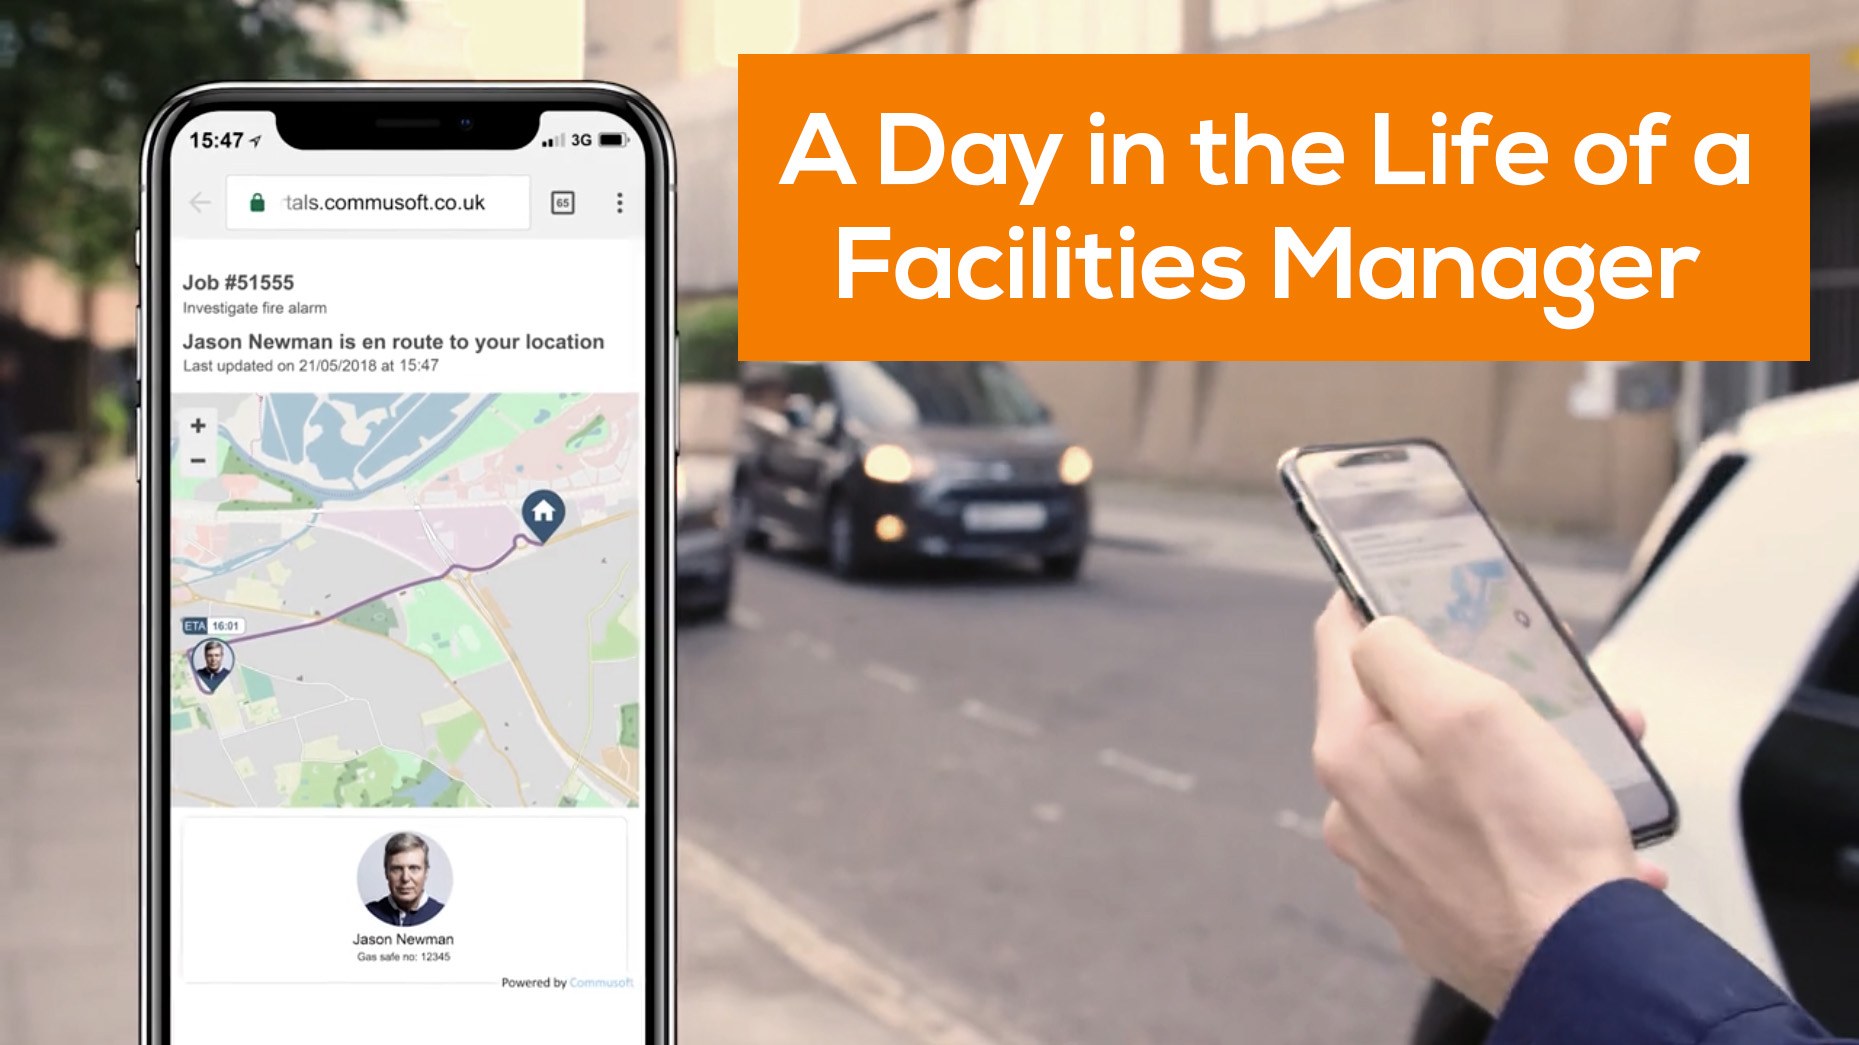 A Day in the Life of a Facilities Manager with Commusoft